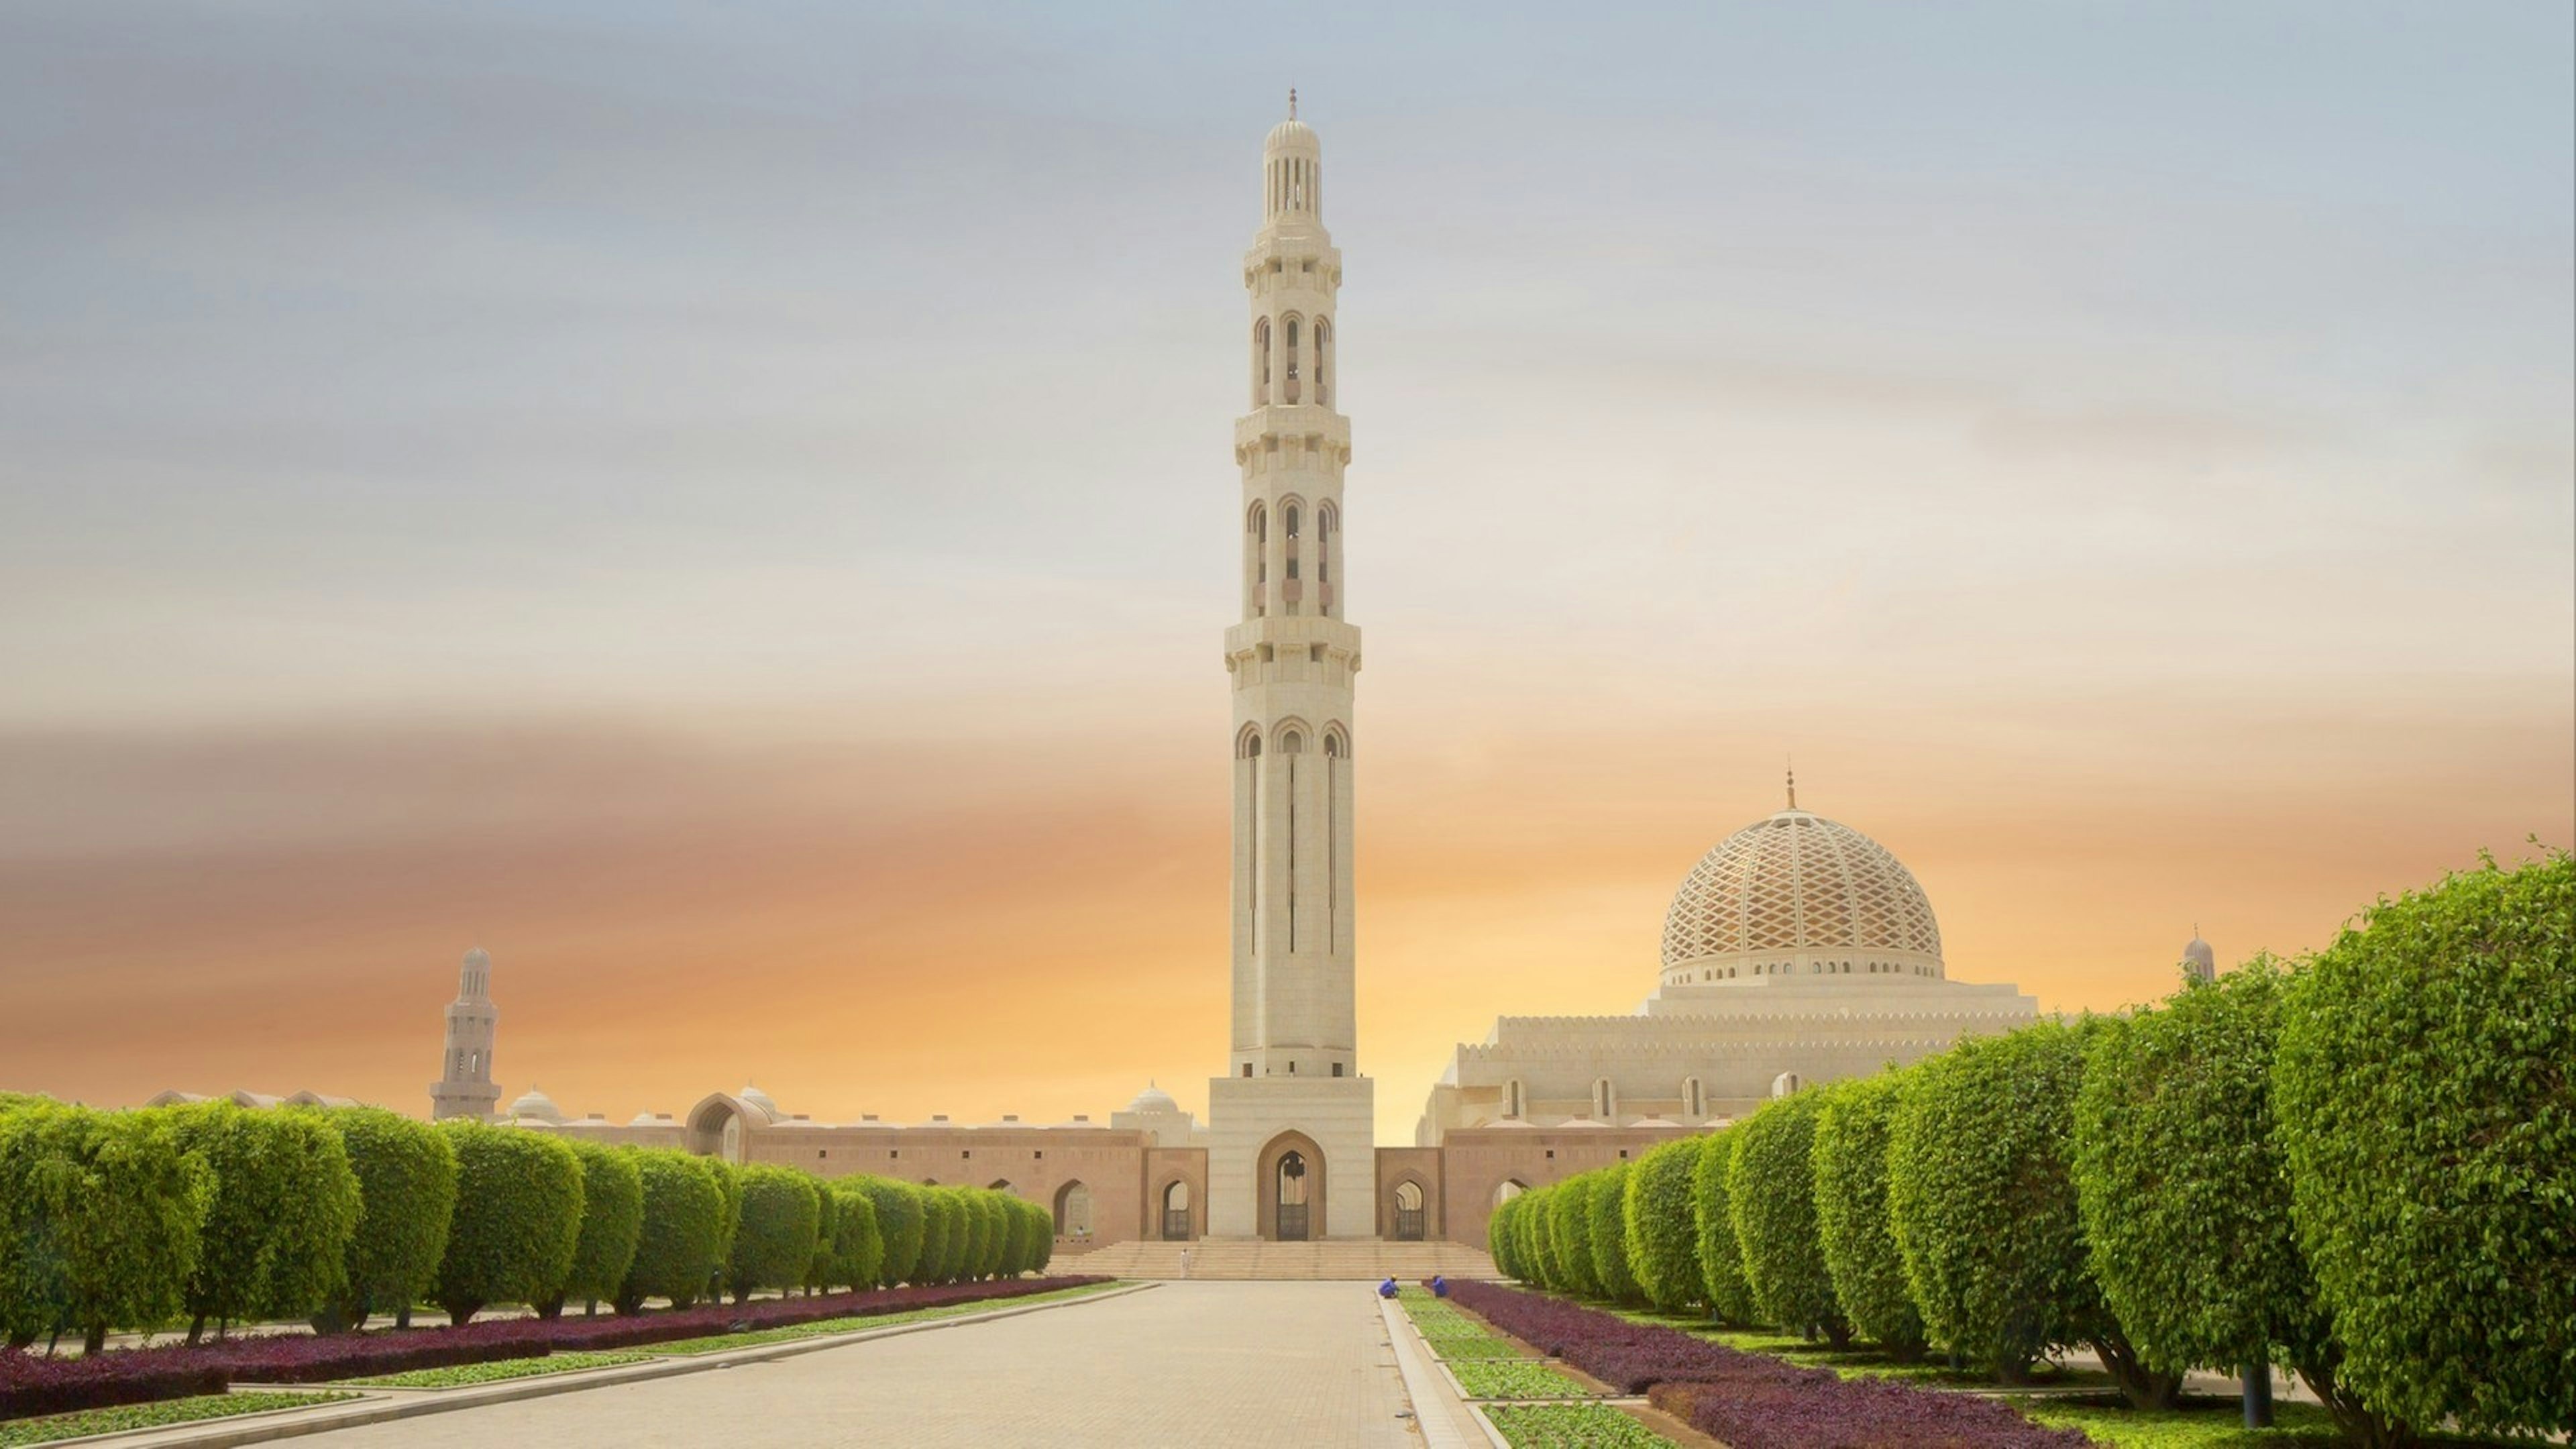 The Muscat mosque is the main active mosque of Muscat, Oman.